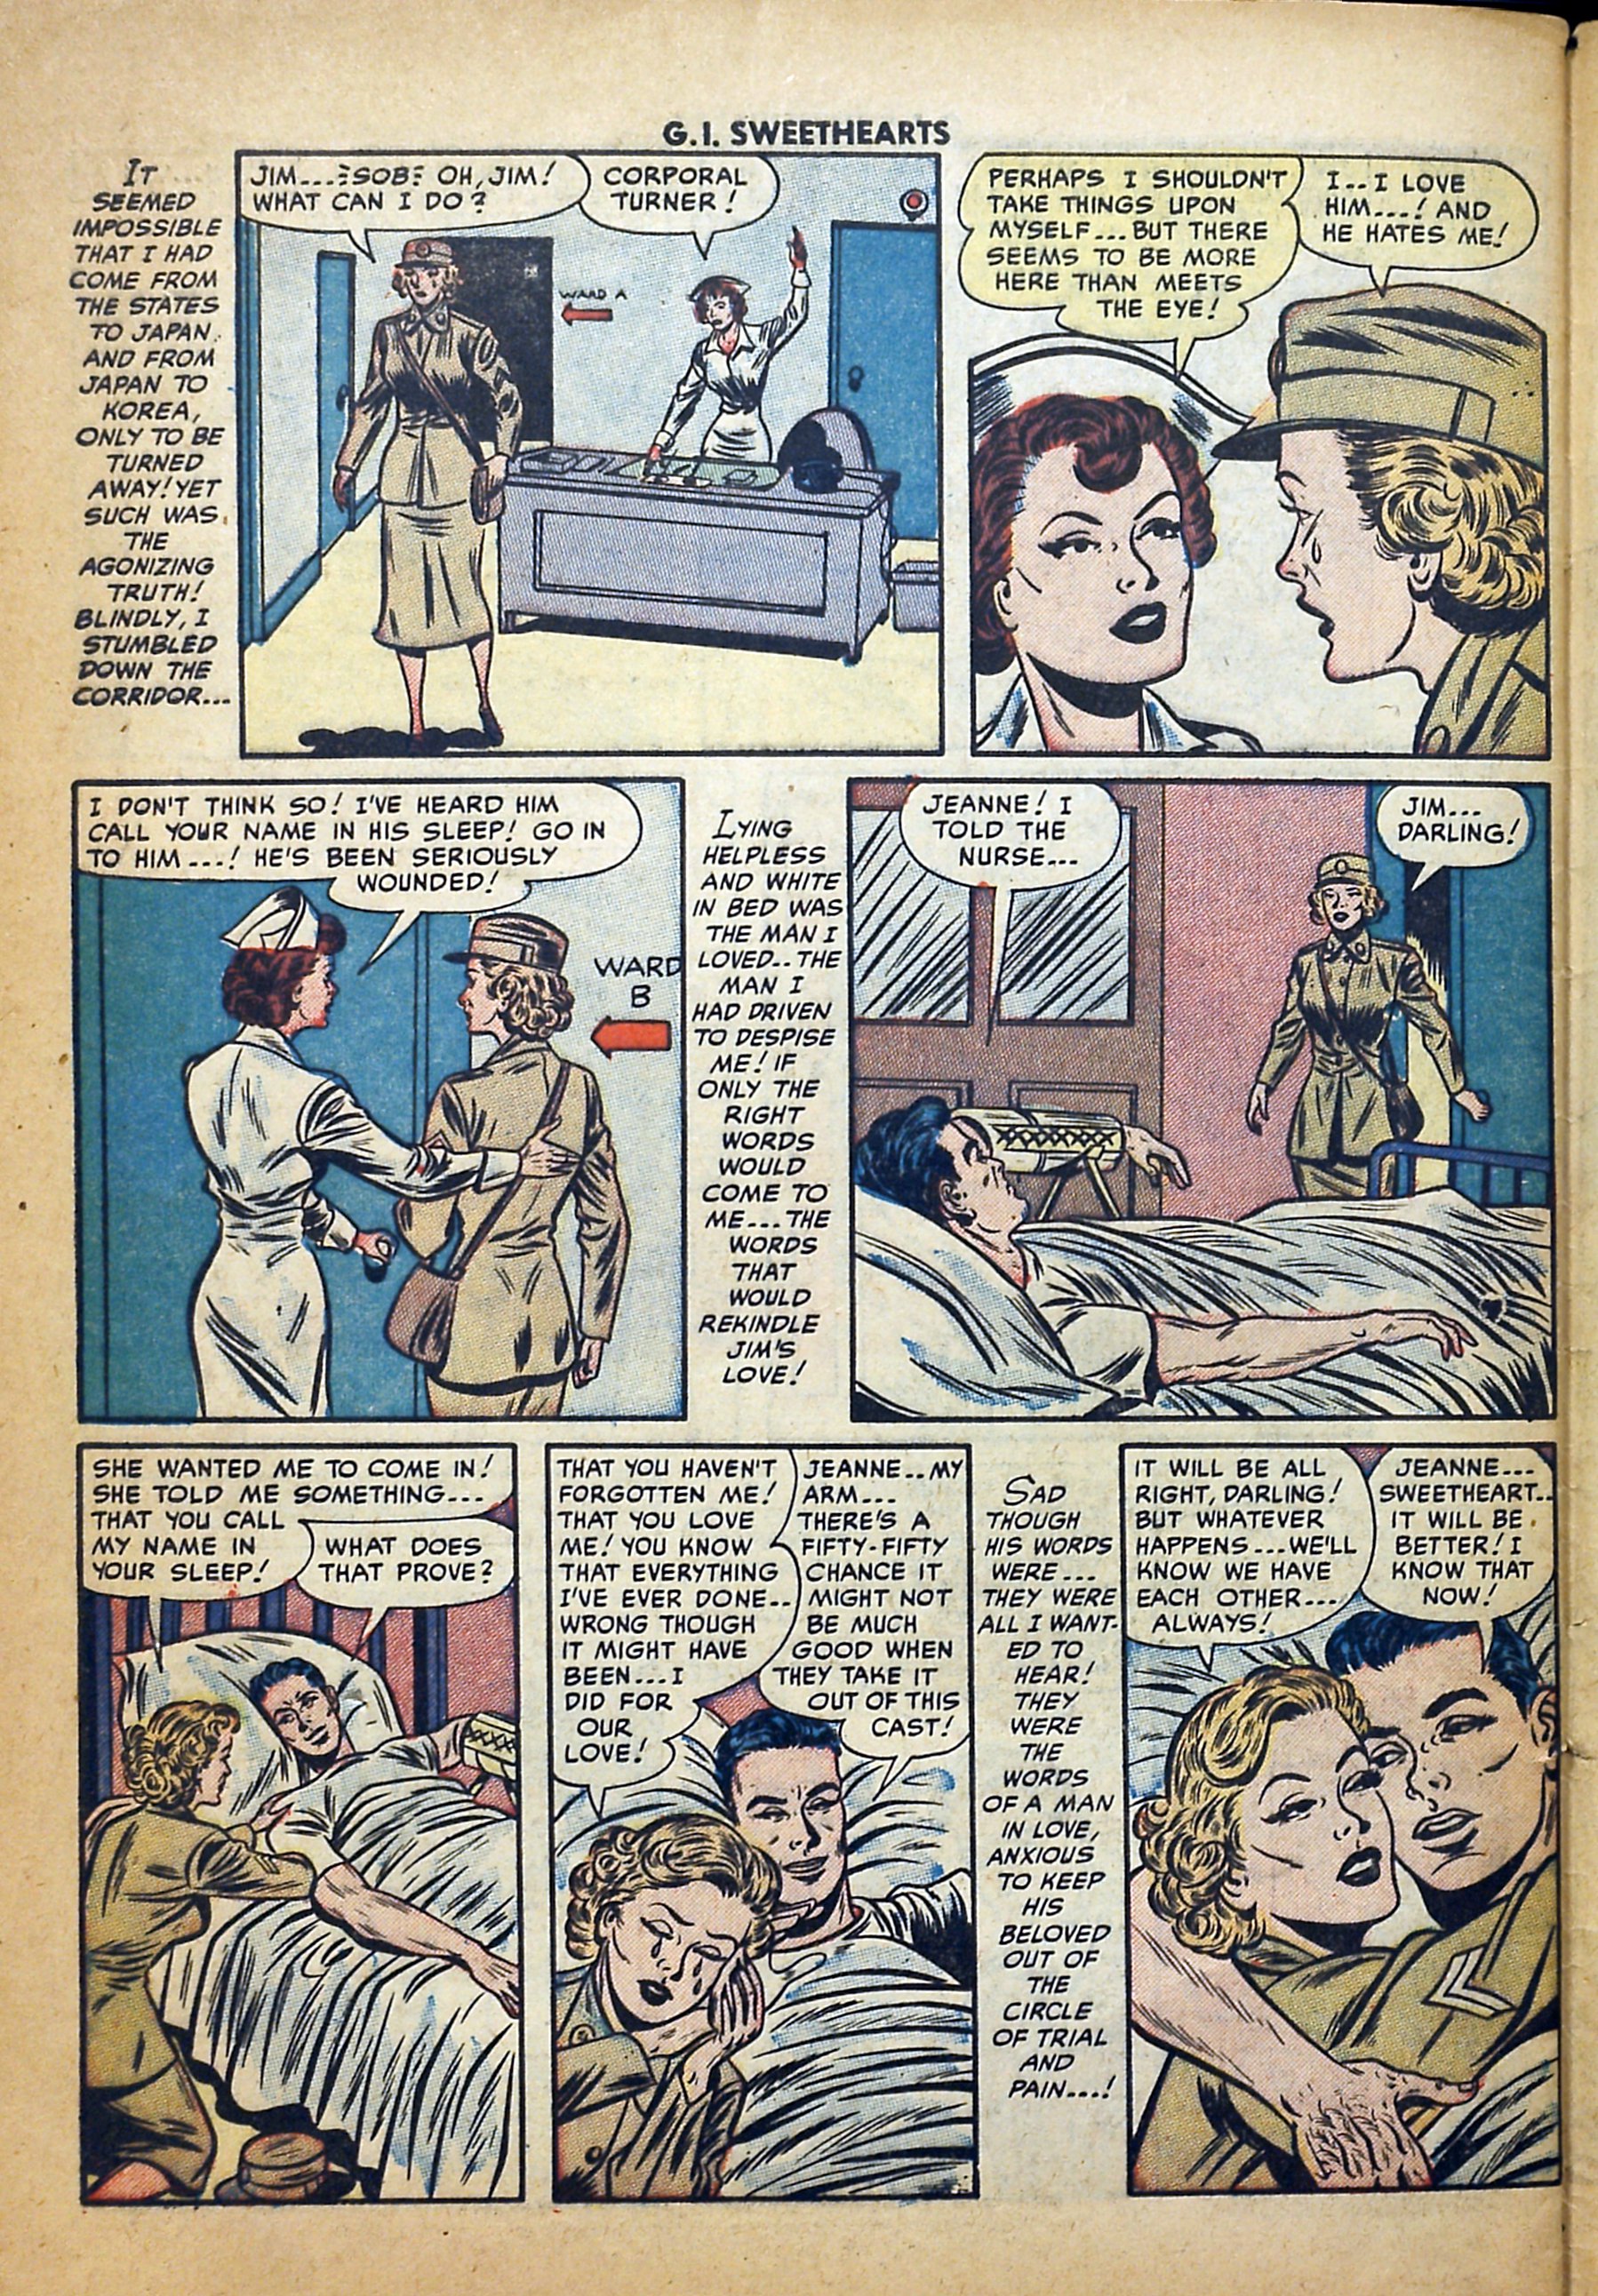 Read online G.I. Sweethearts comic -  Issue #43 - 32